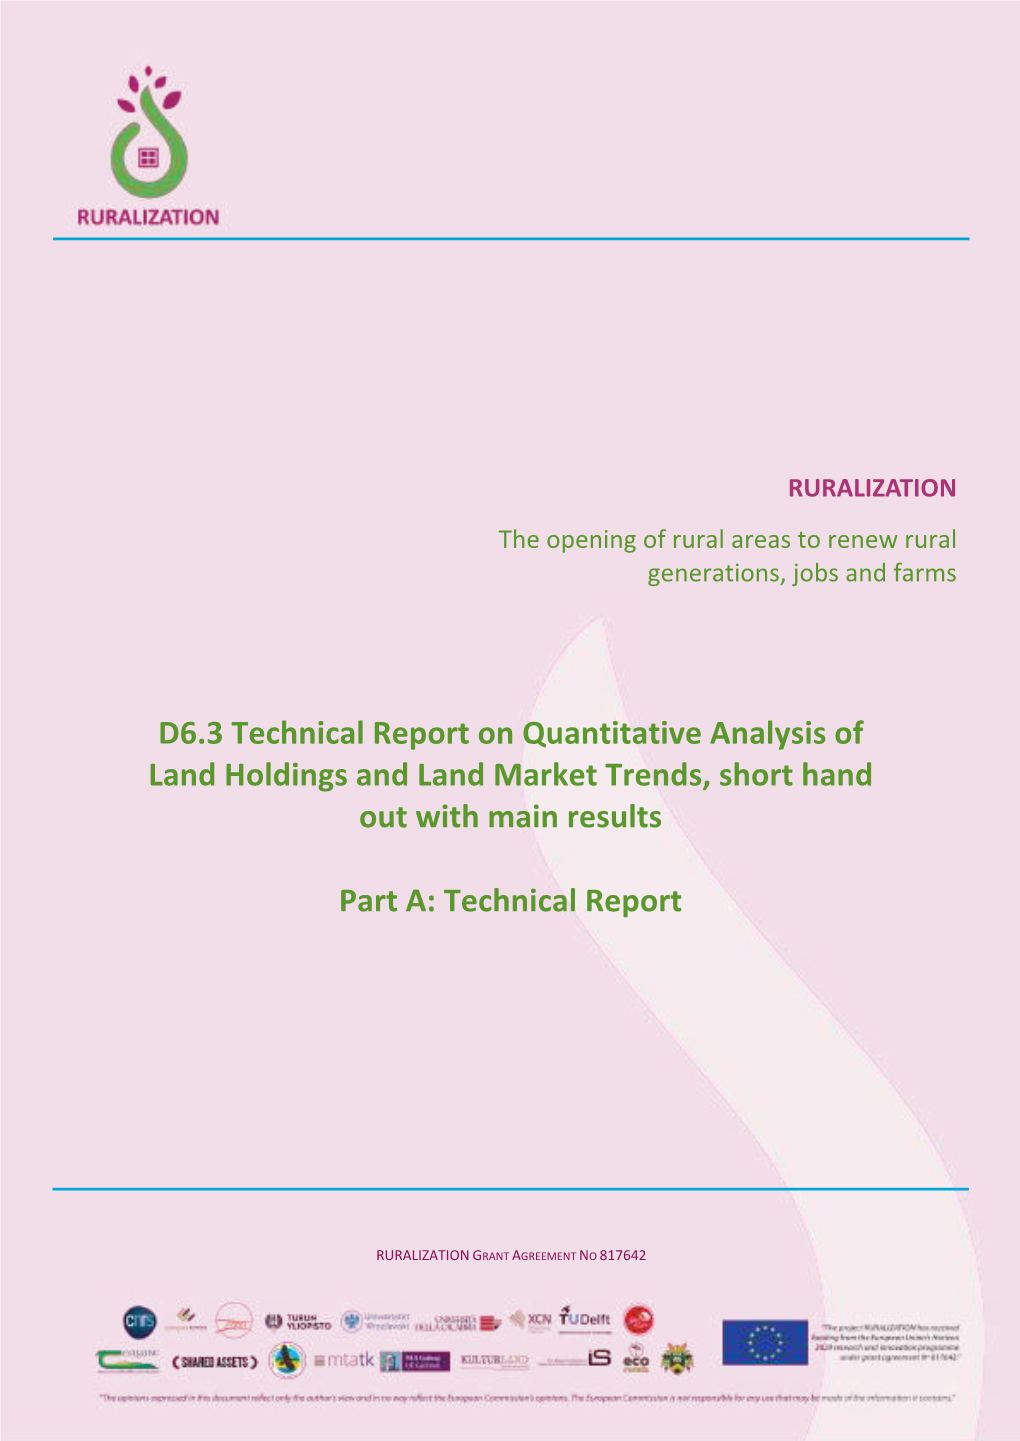 D6.3 Technical Report on Quantitative Analysis of Land Holdings and Land Market Trends, Short Hand out with Main Results